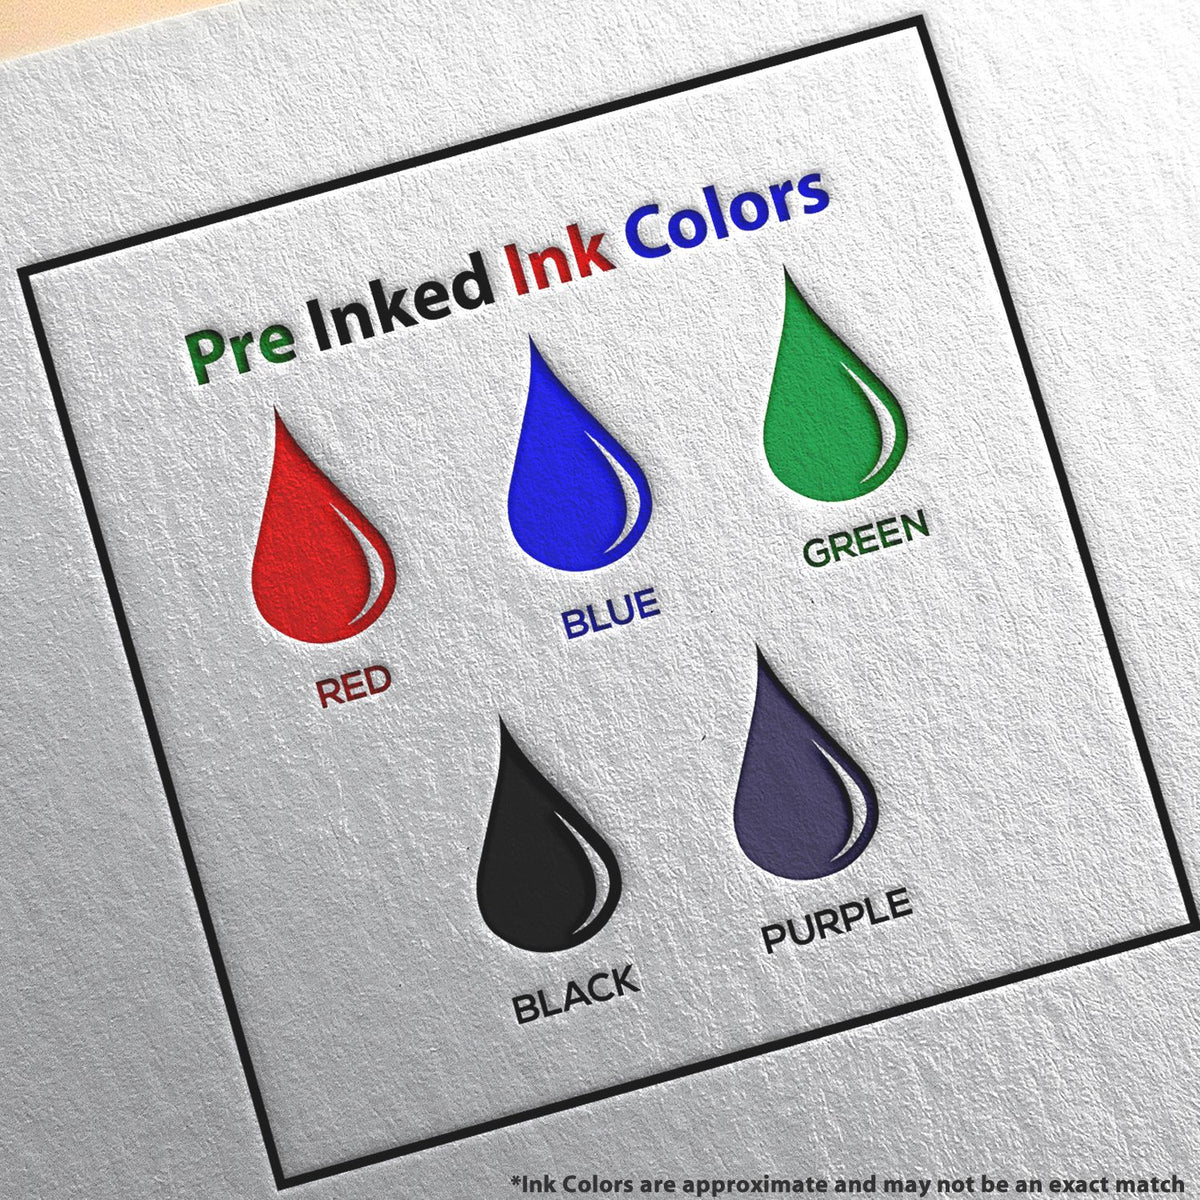 A picture showing the different ink colors or hues available for the Slim Pre-Inked Kentucky Land Surveyor Seal Stamp product.